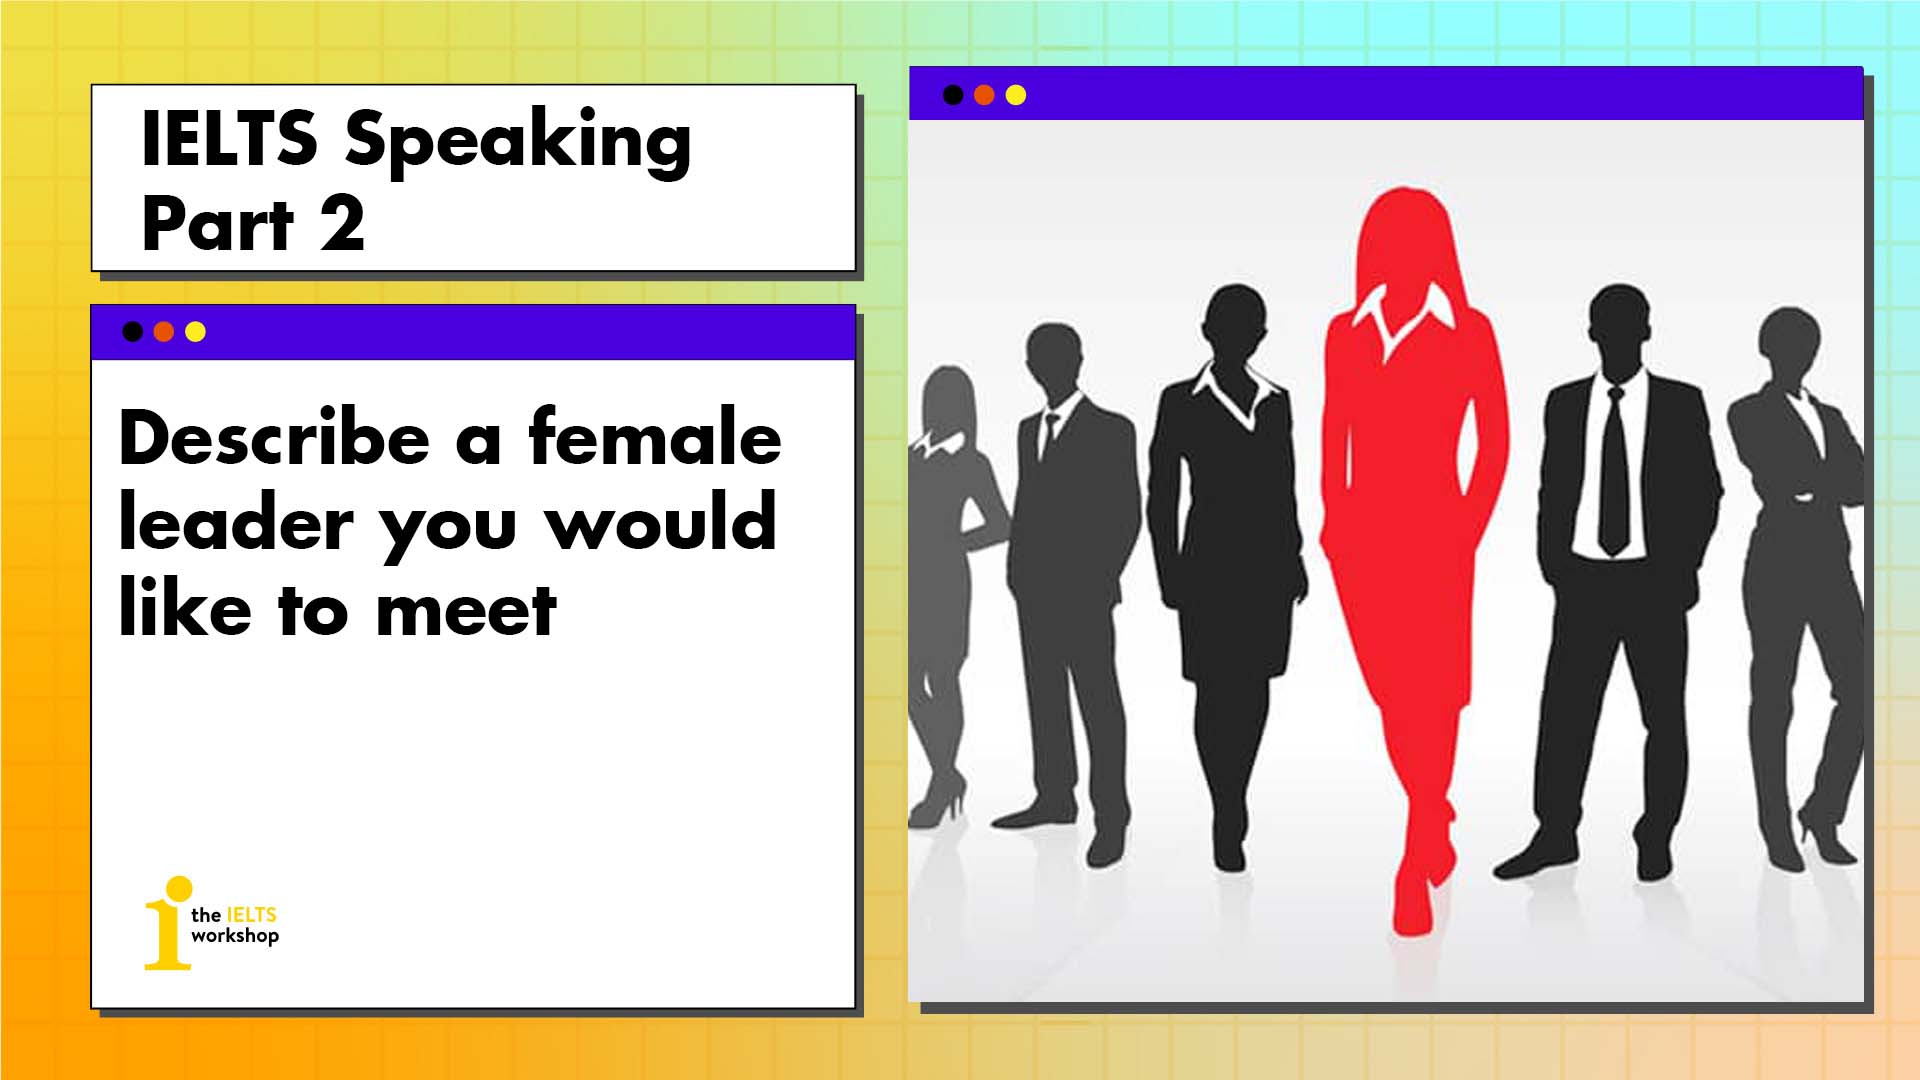 Describe a female leader you would like to meet